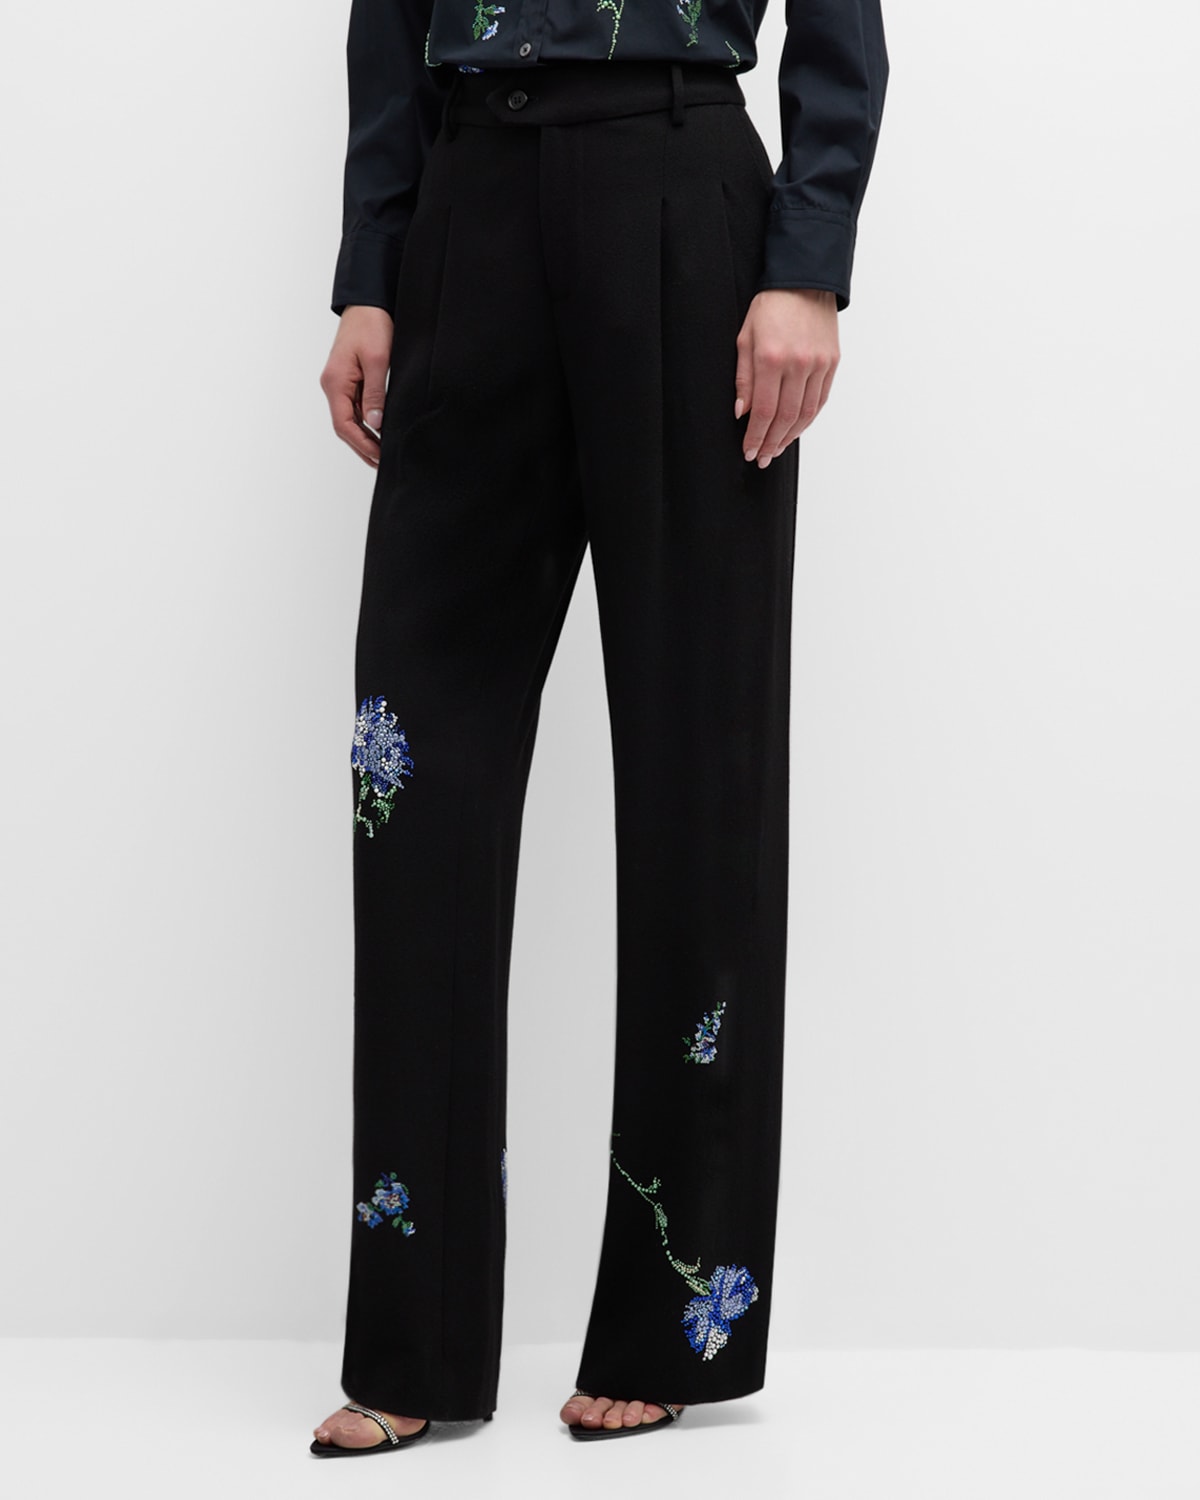 Libertine Cecil Beaton Carnation Embellished Straight-leg Baggy Trousers In Black